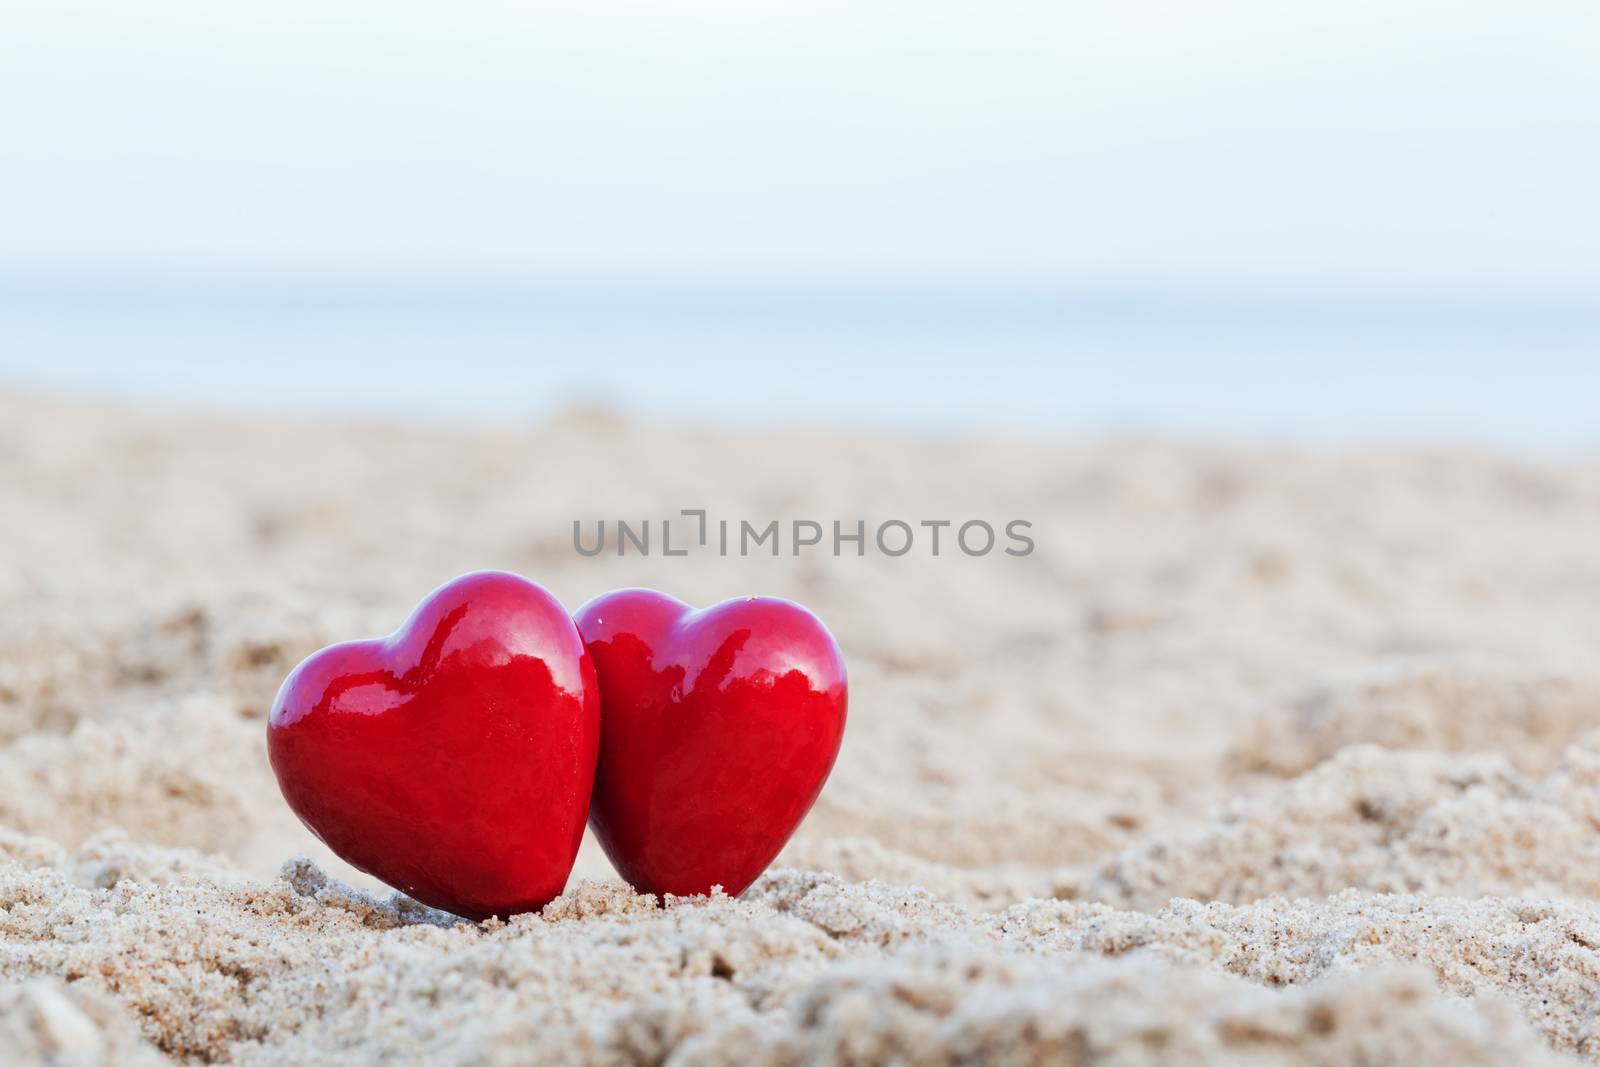 Two red hearts on the beach symbolizing love, Valentine's Day, romantic couple. Calm ocean in the background